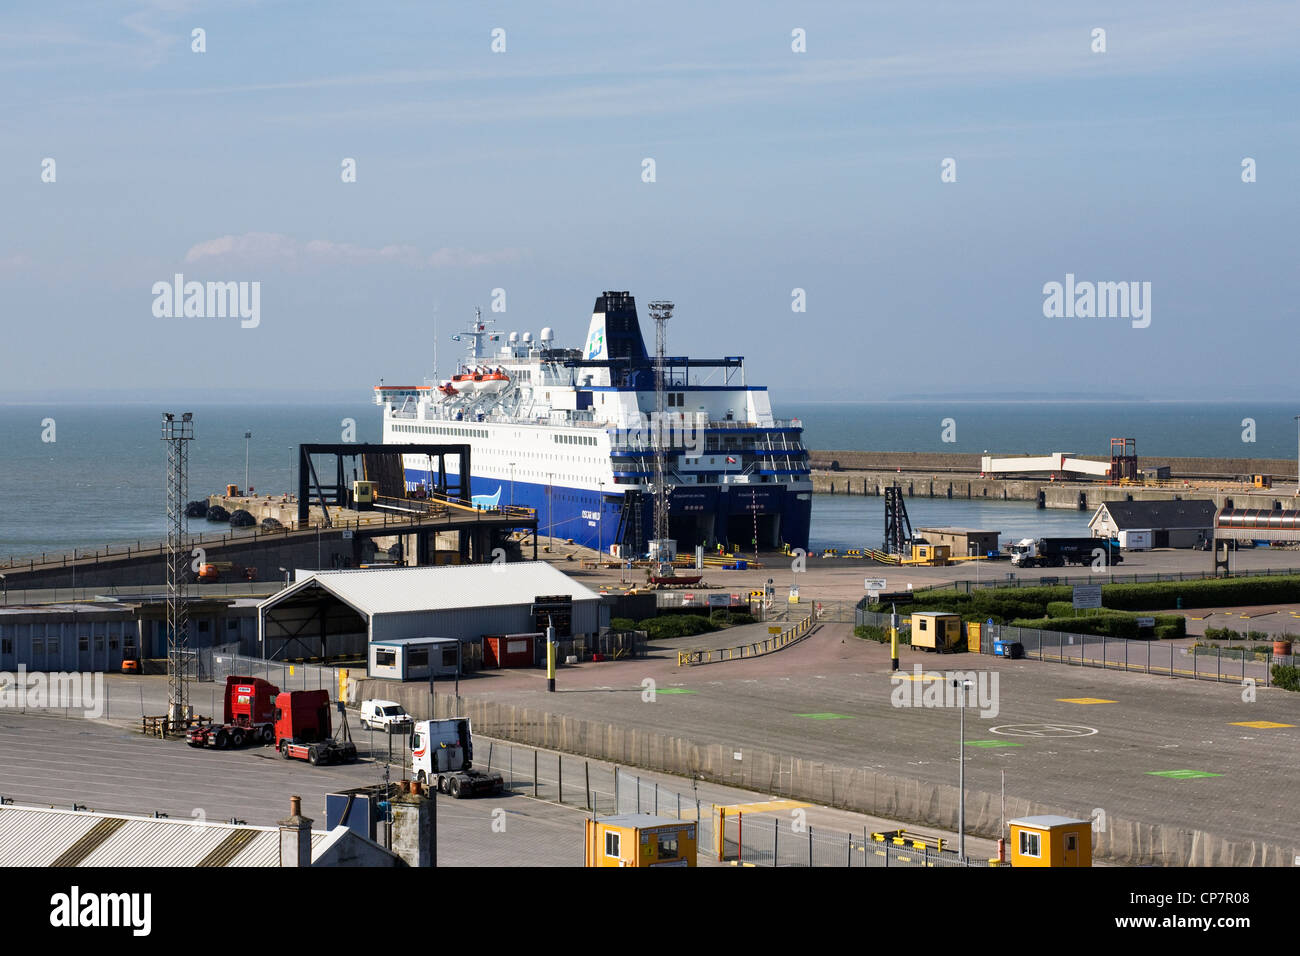 Passenger ferry at Rosslare Harbour, County Wexford, Eire. Stock Photo